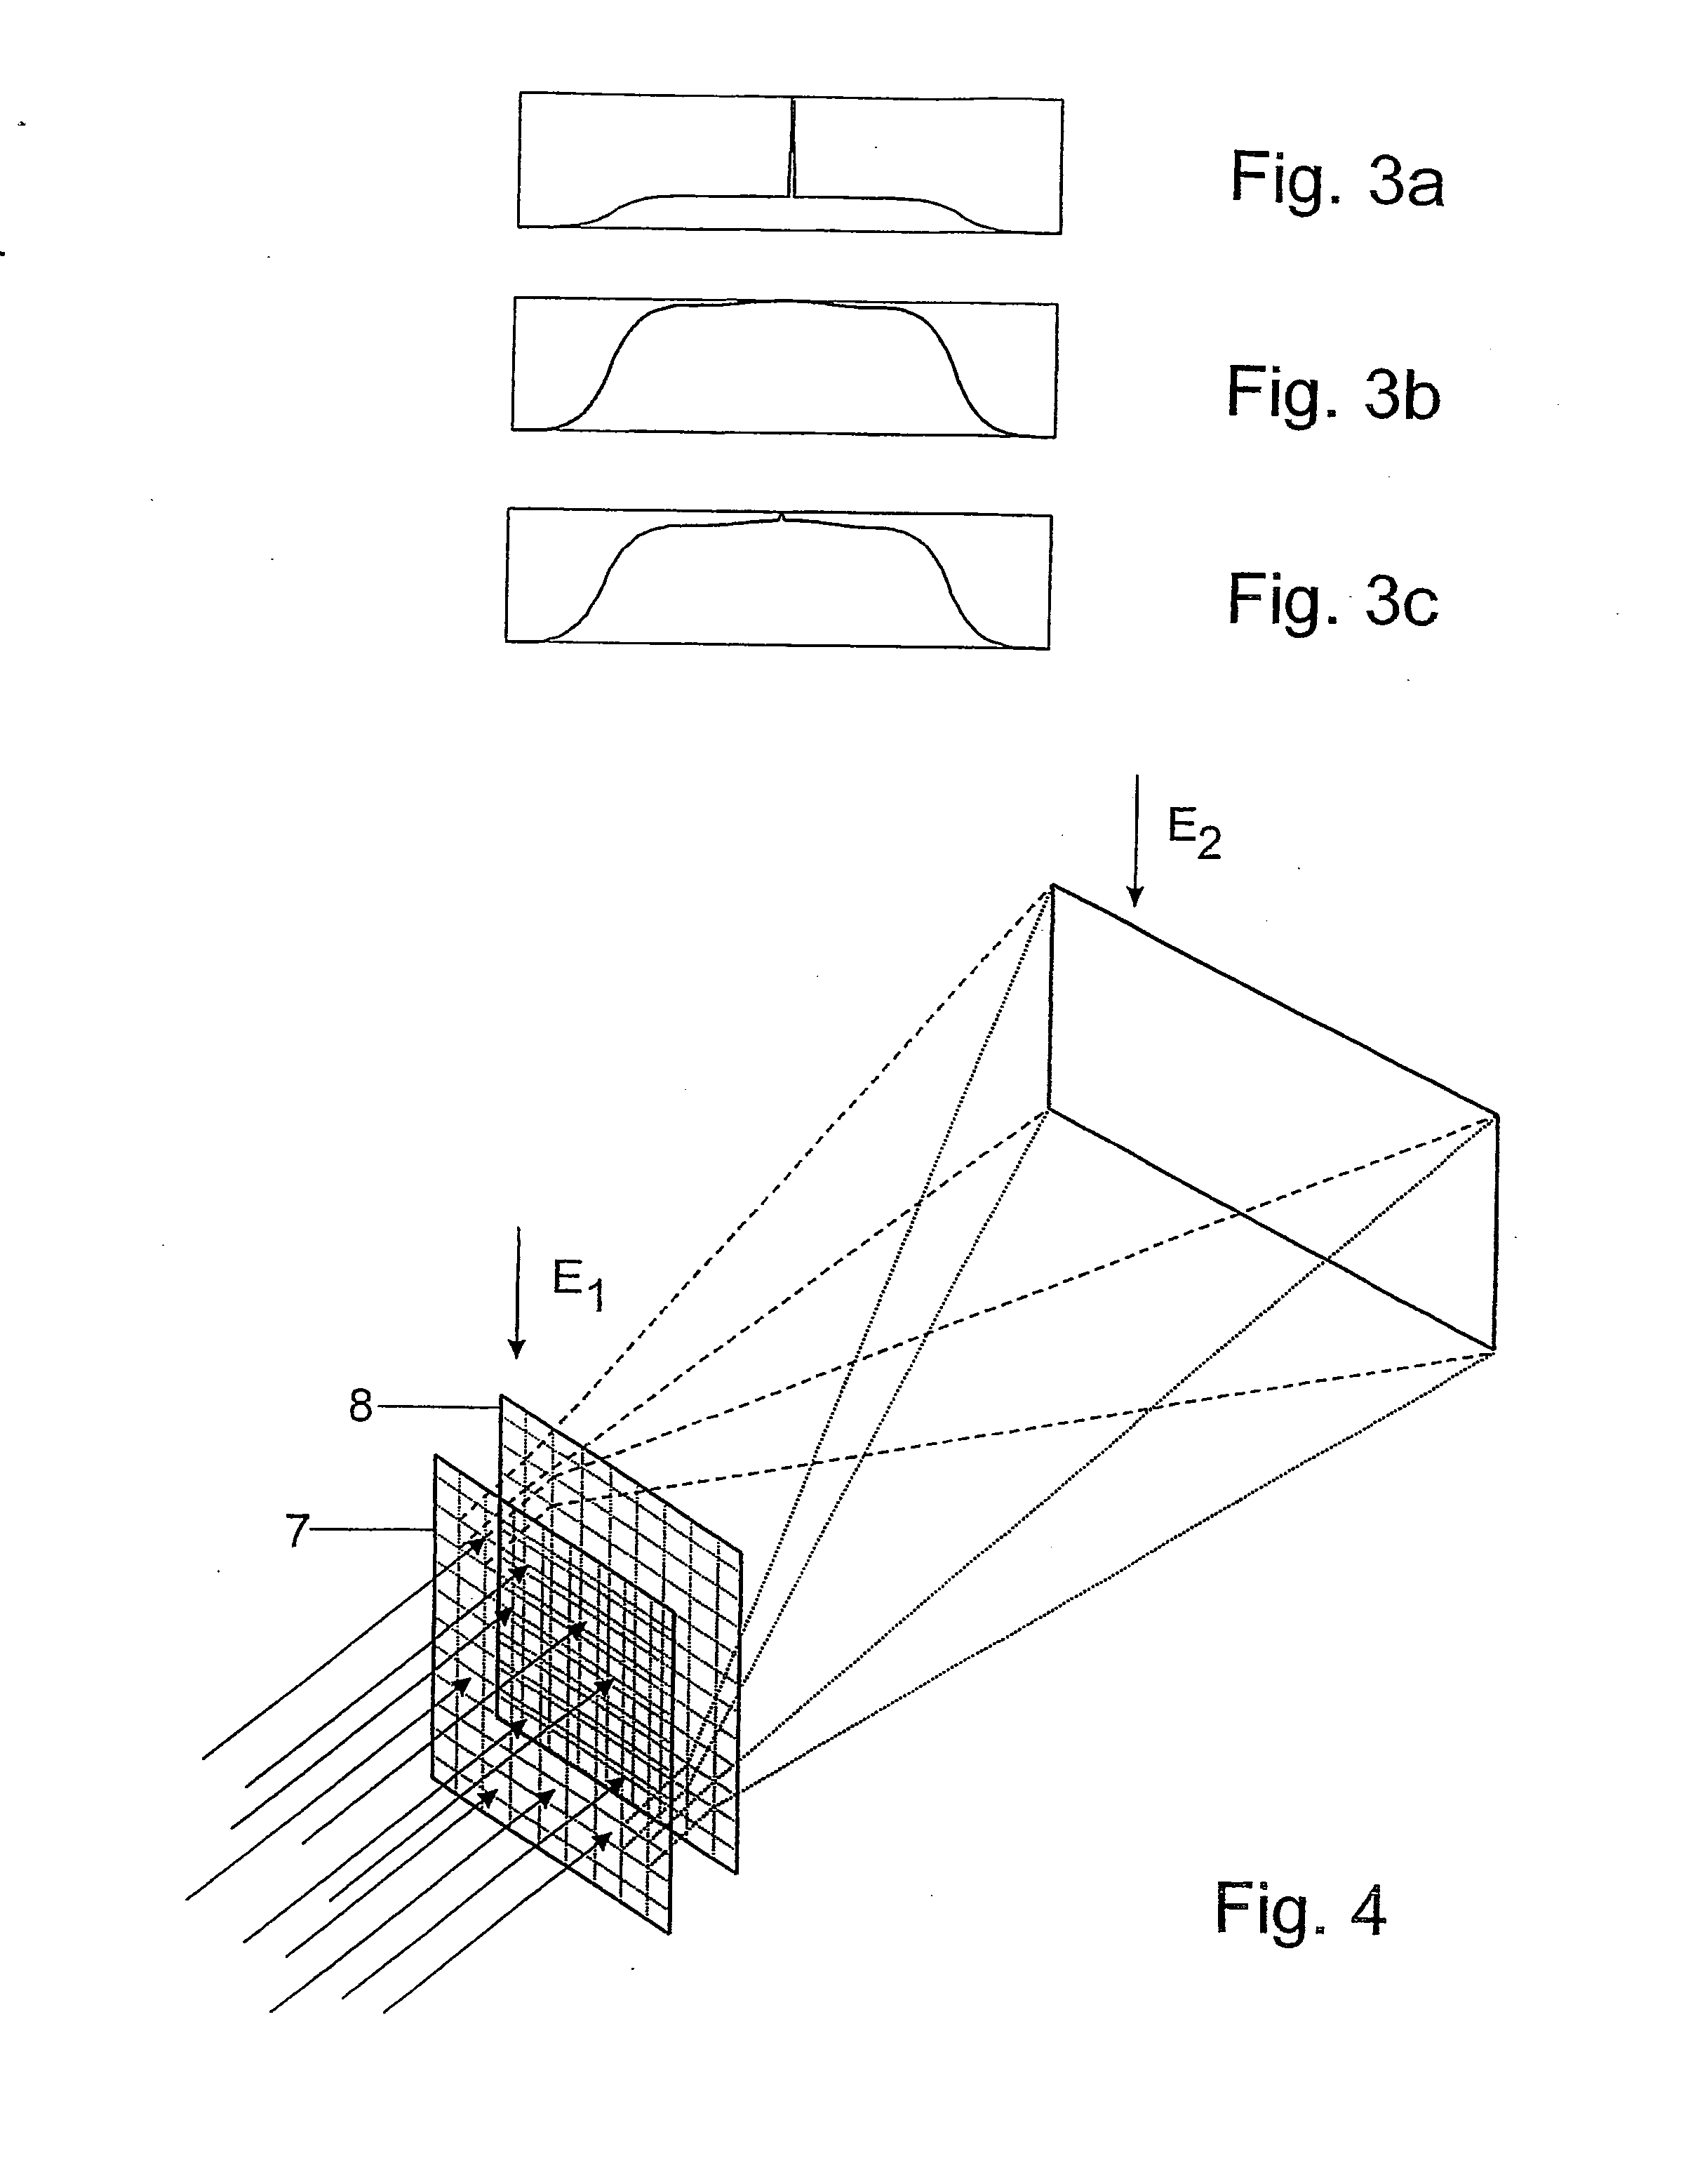 Optical System For Converting A Primary Intensity Distribution Into A Predefined Intensity Distribution That Is Dependent On A Solid Angle